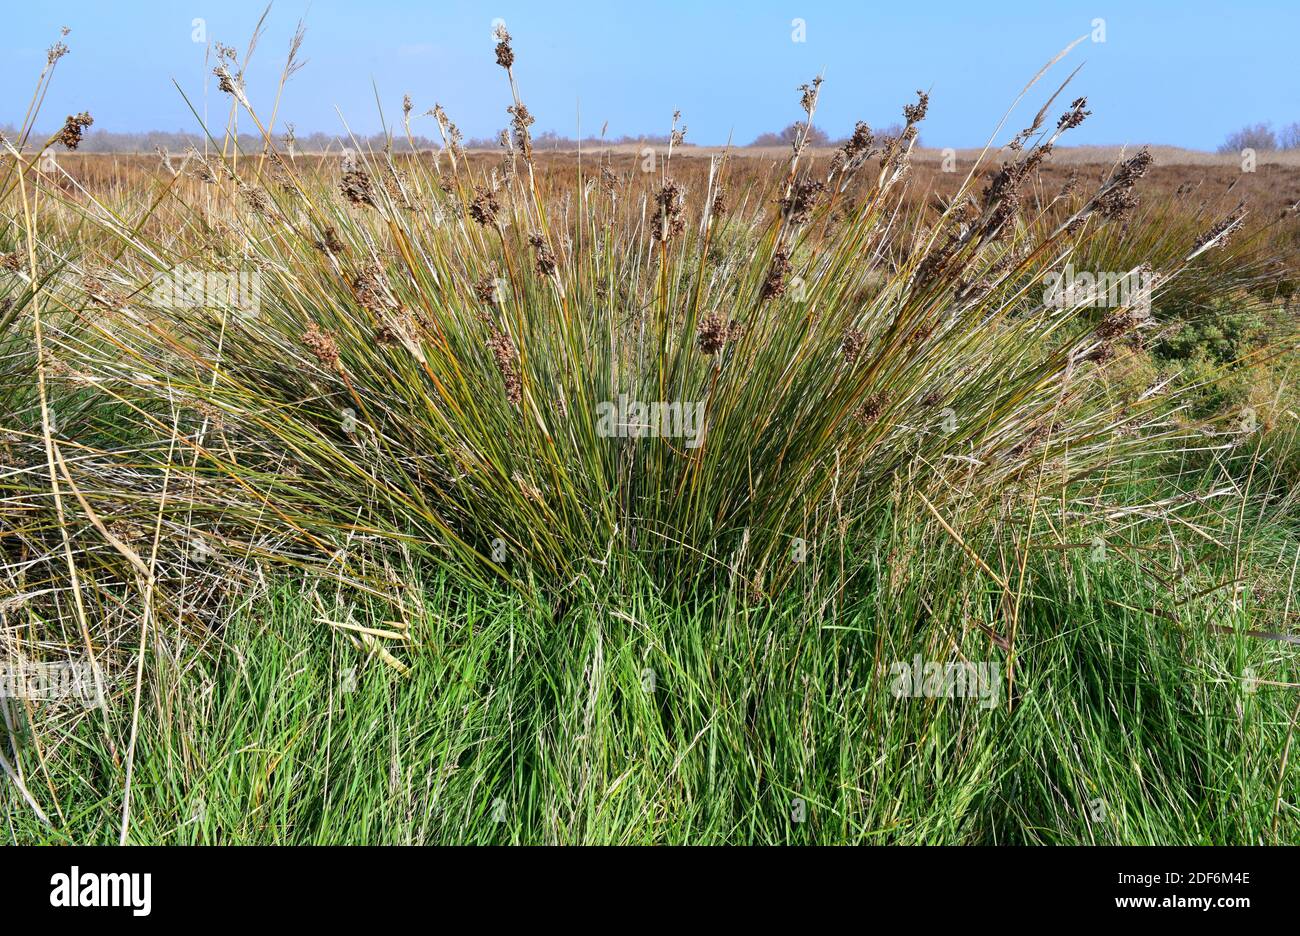 Spiny rush or sharp rush (Juncus acutus) is a perennial herb native to dunes, wetlands and salt marshes of Europe, north Africa, western Asia and Stock Photo